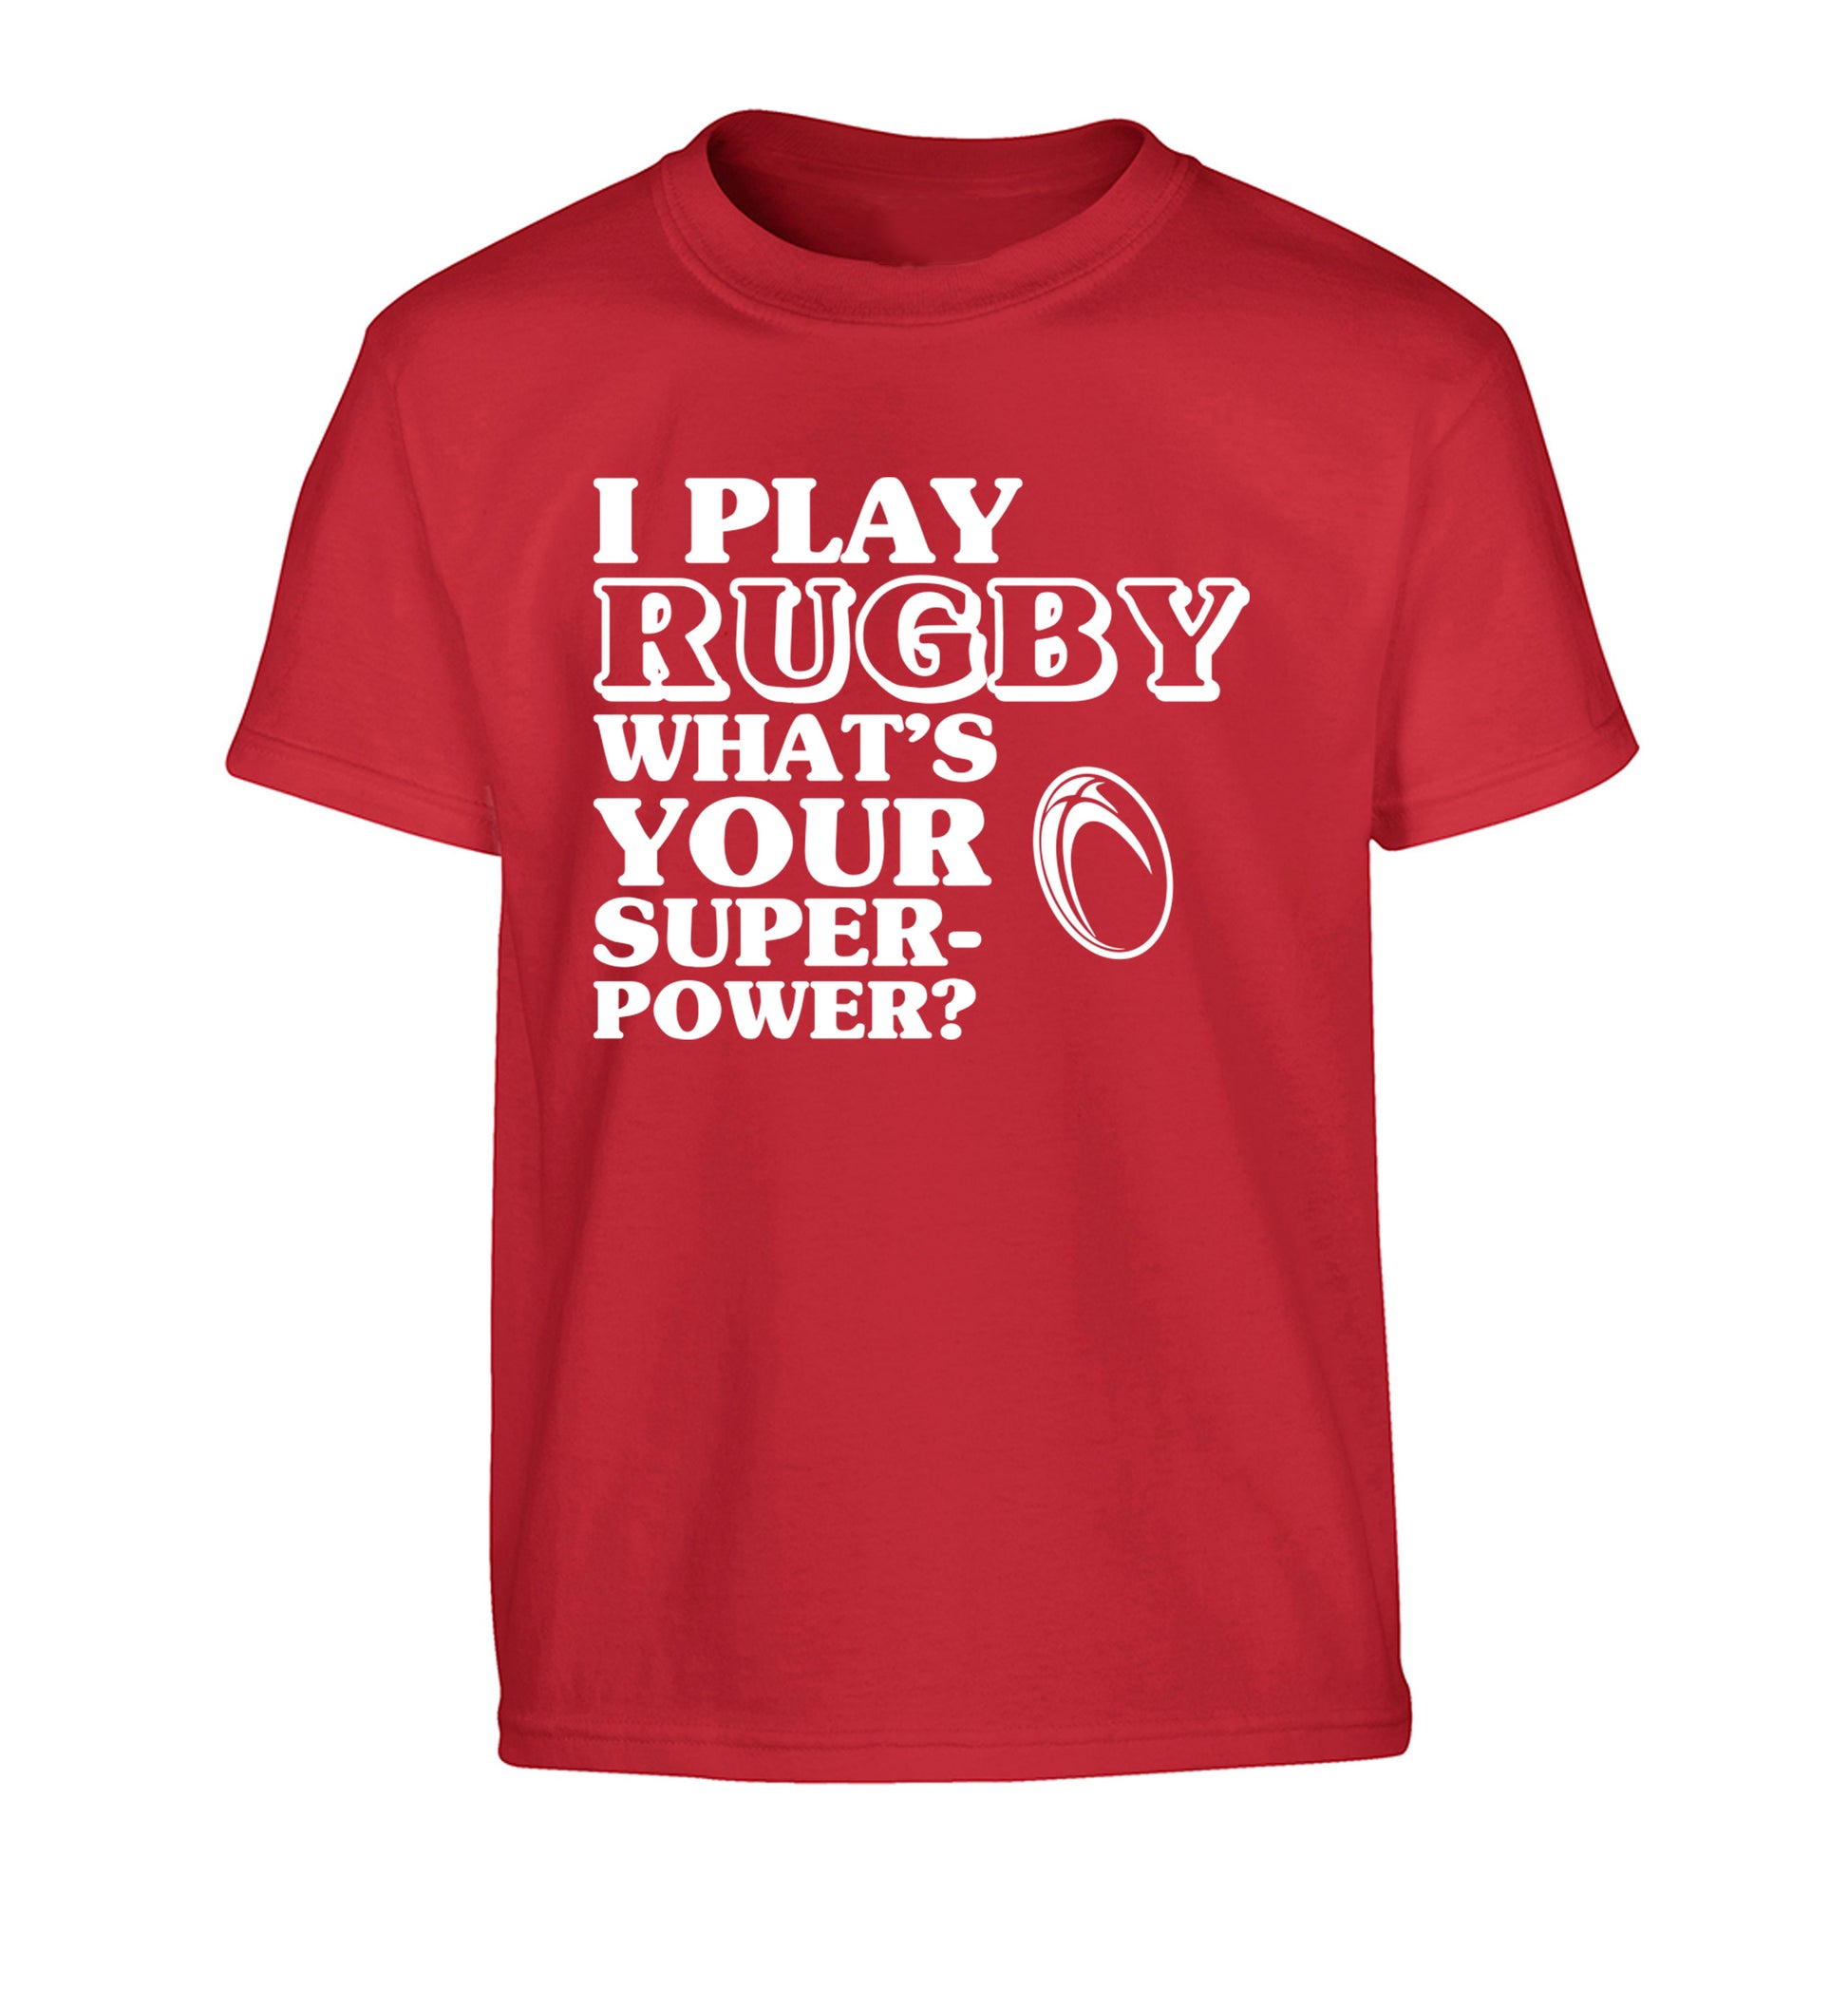 I play rugby what's your superpower? Children's red Tshirt 12-13 Years